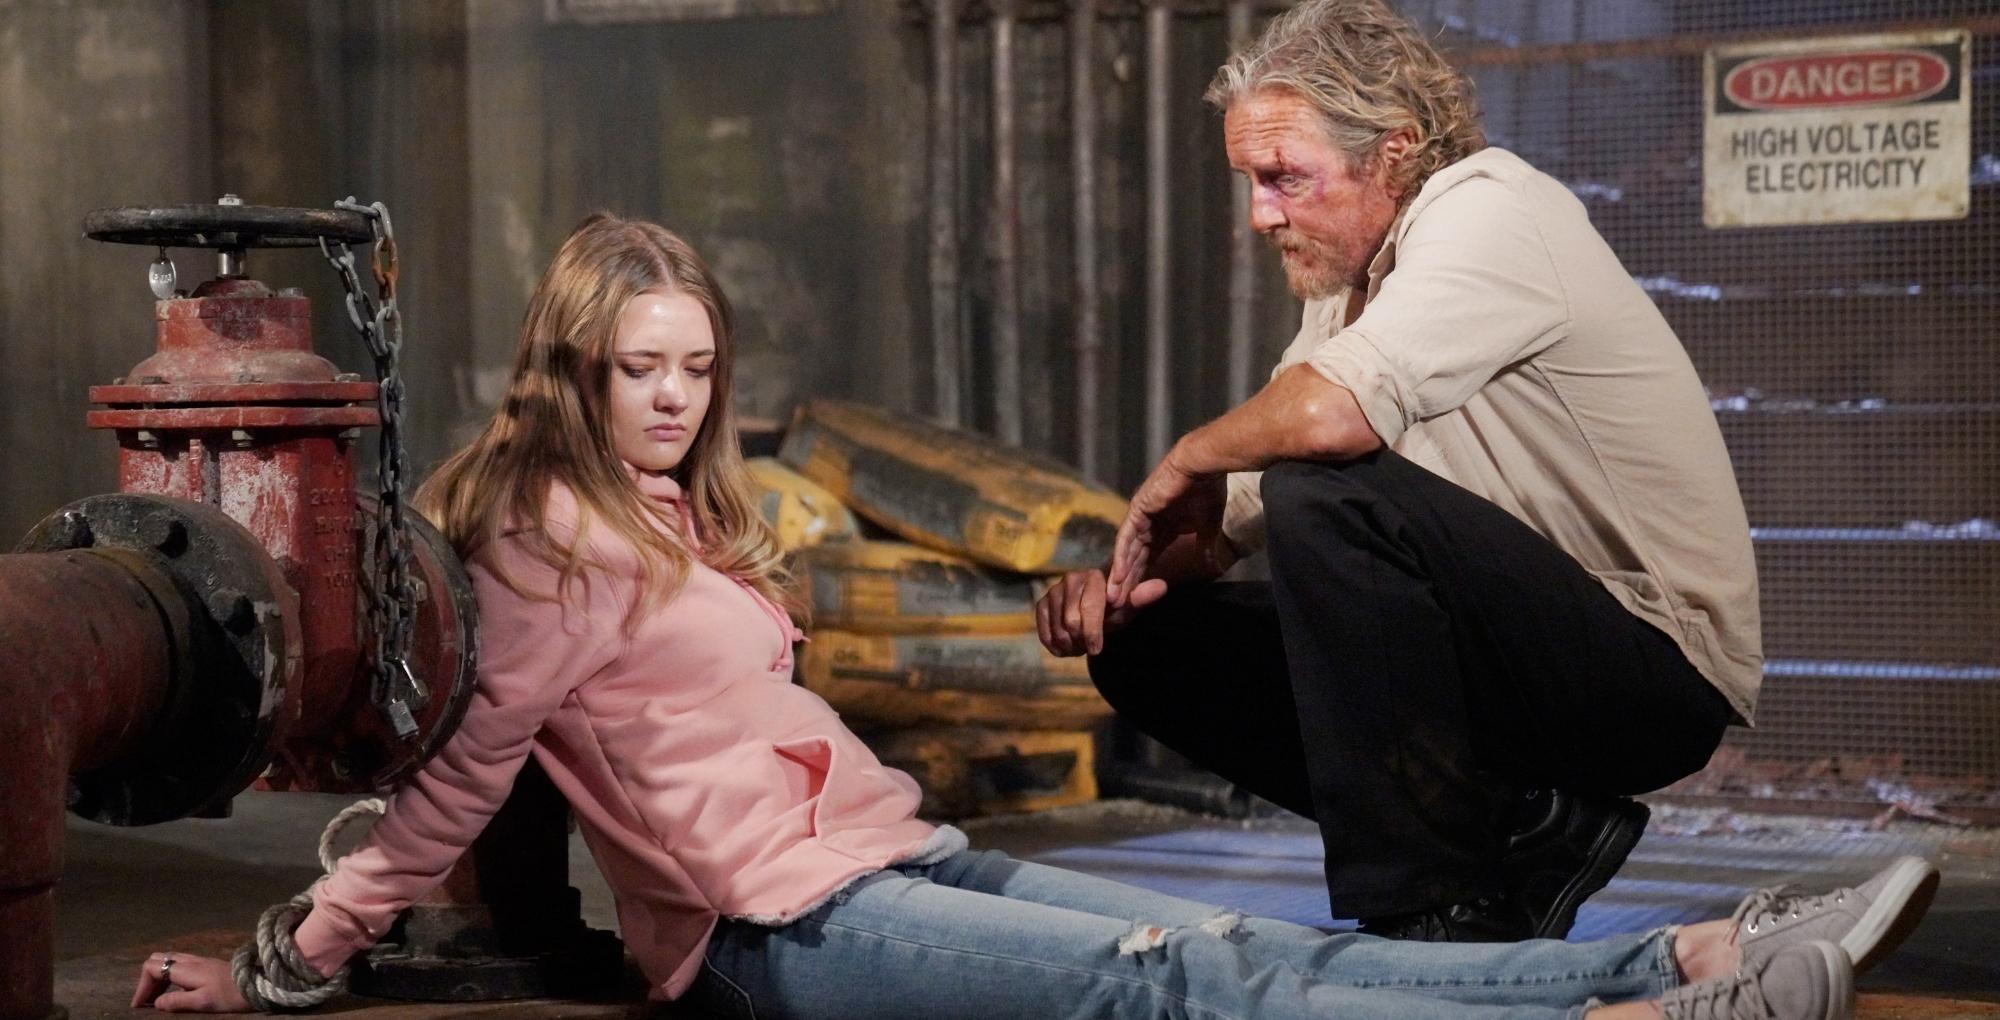 the young and the restless spoilers for june 16, 2023, have faith as cameron's captive.